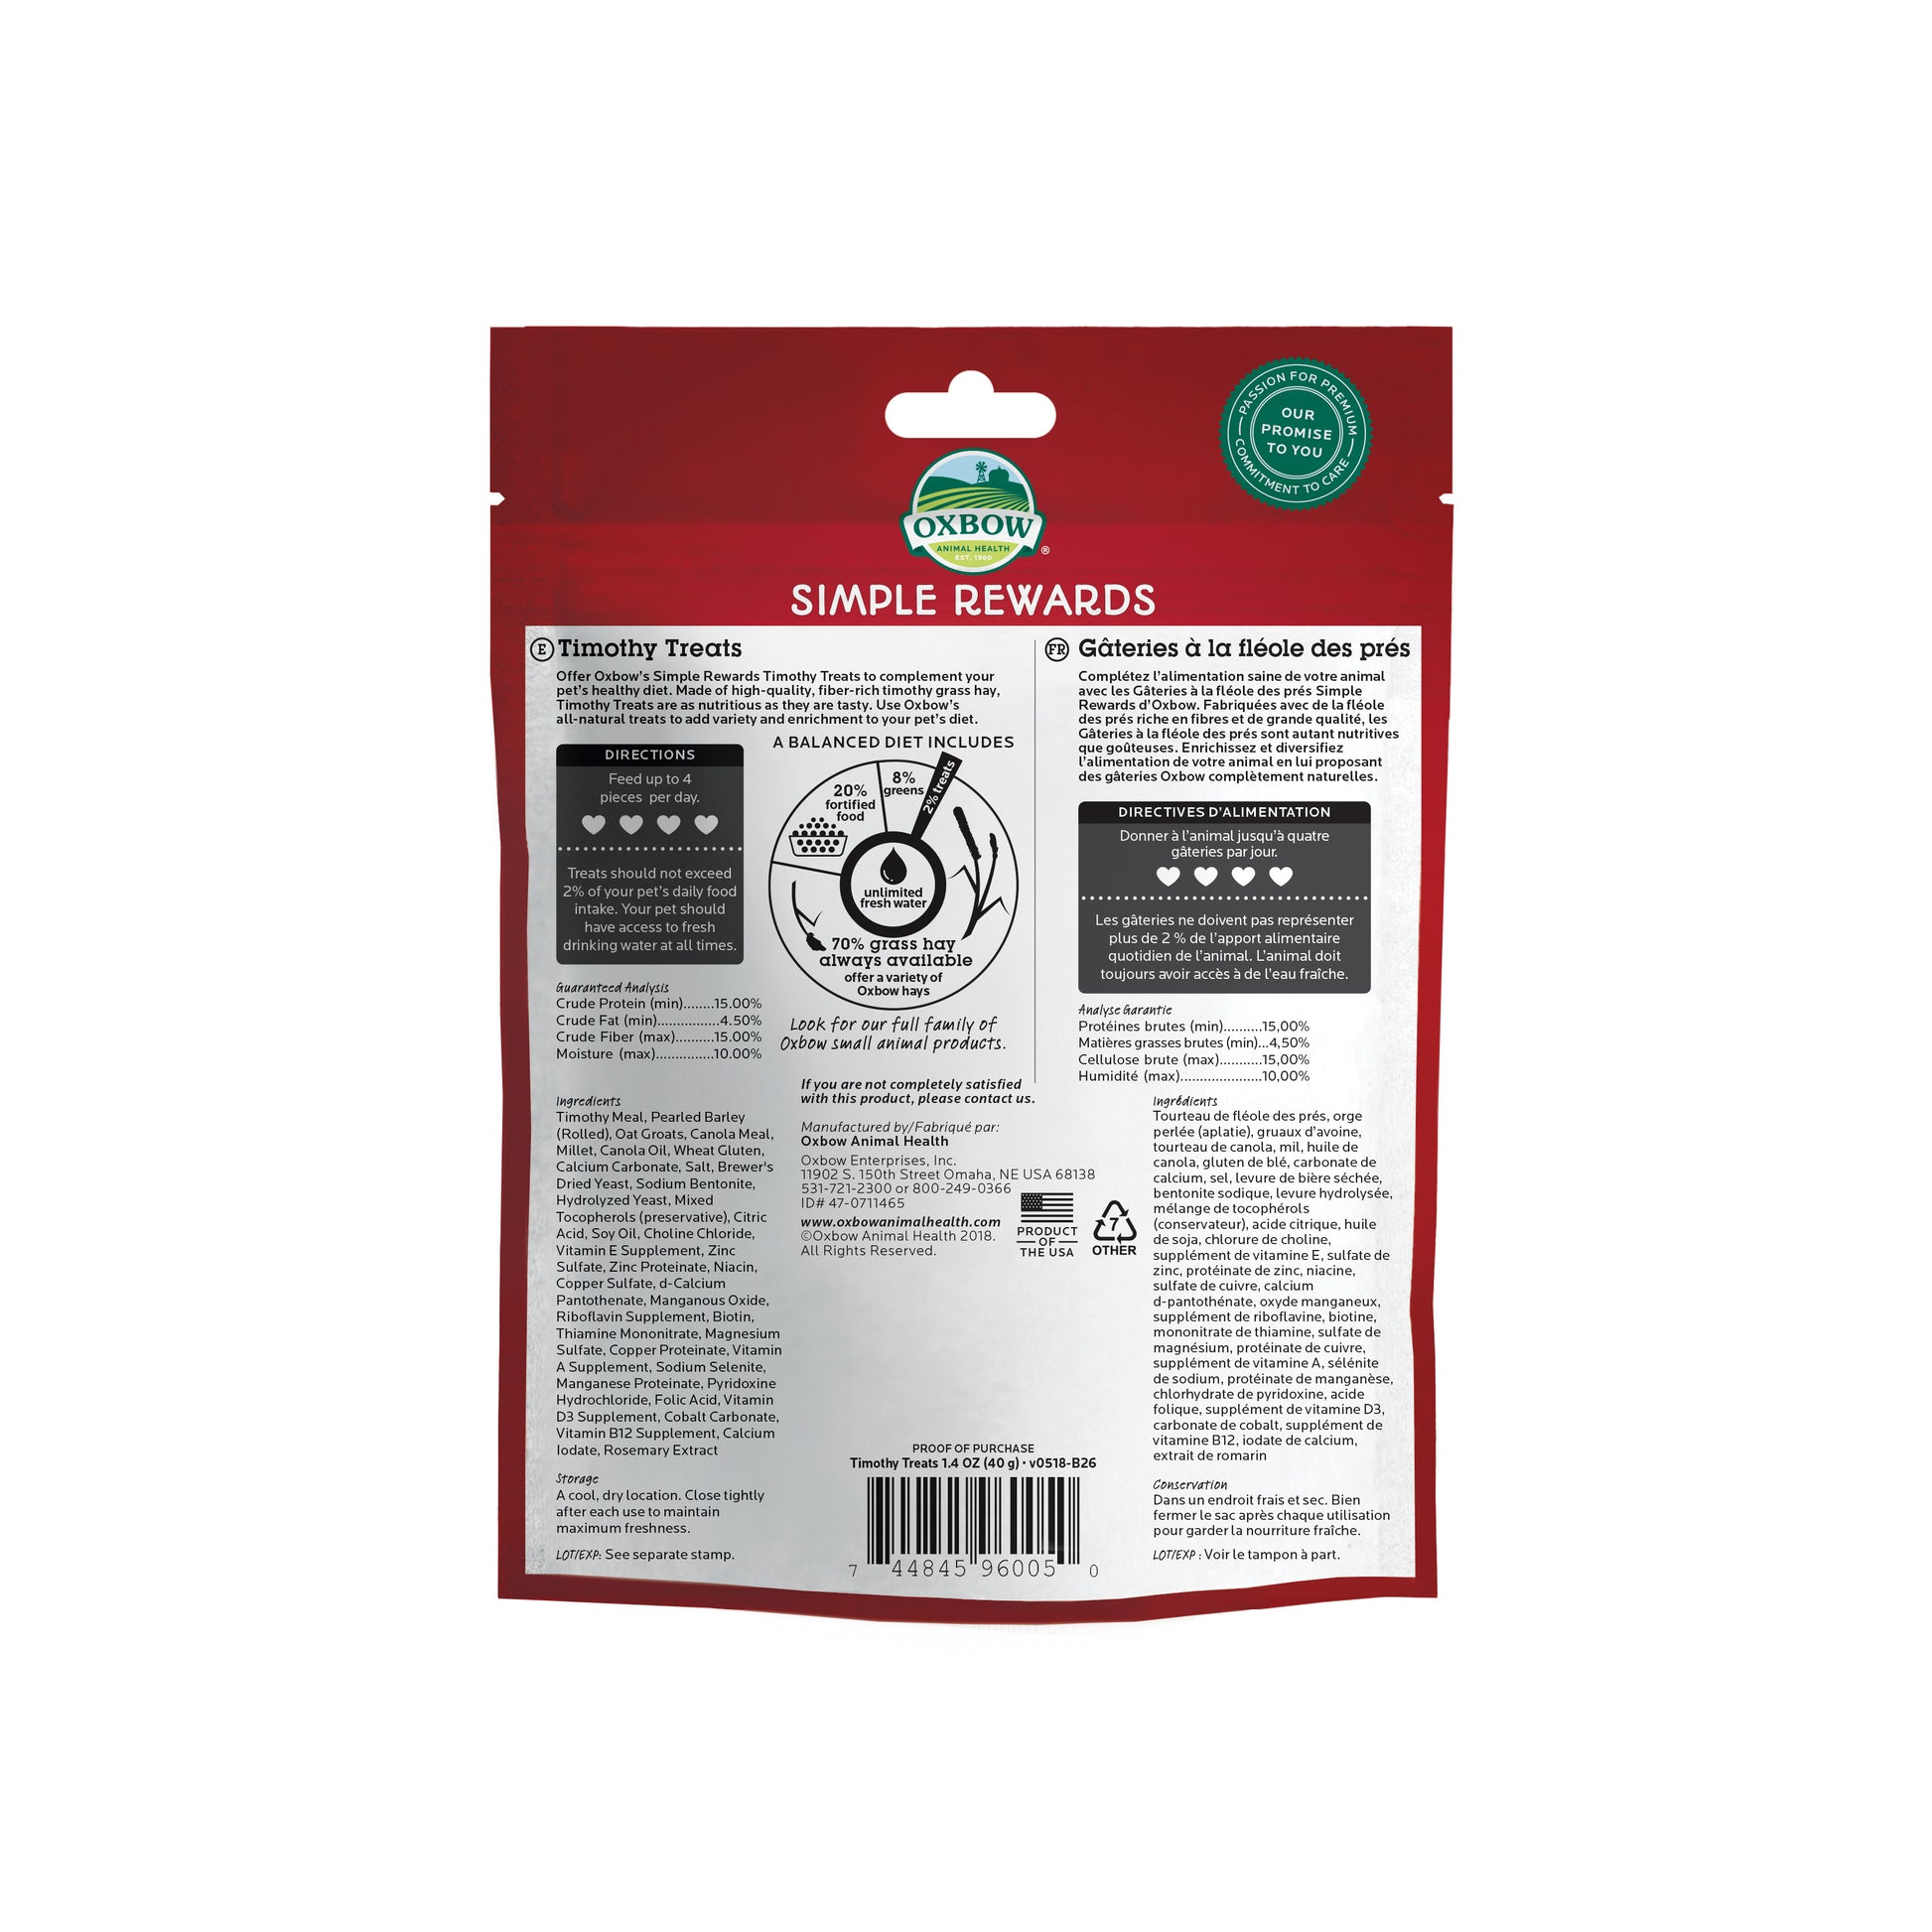 Oxbow Timothy Treats are a wholesome, healthy treat favorite of rabbits, guinea pigs, chinchillas and other small pets. Back side label.